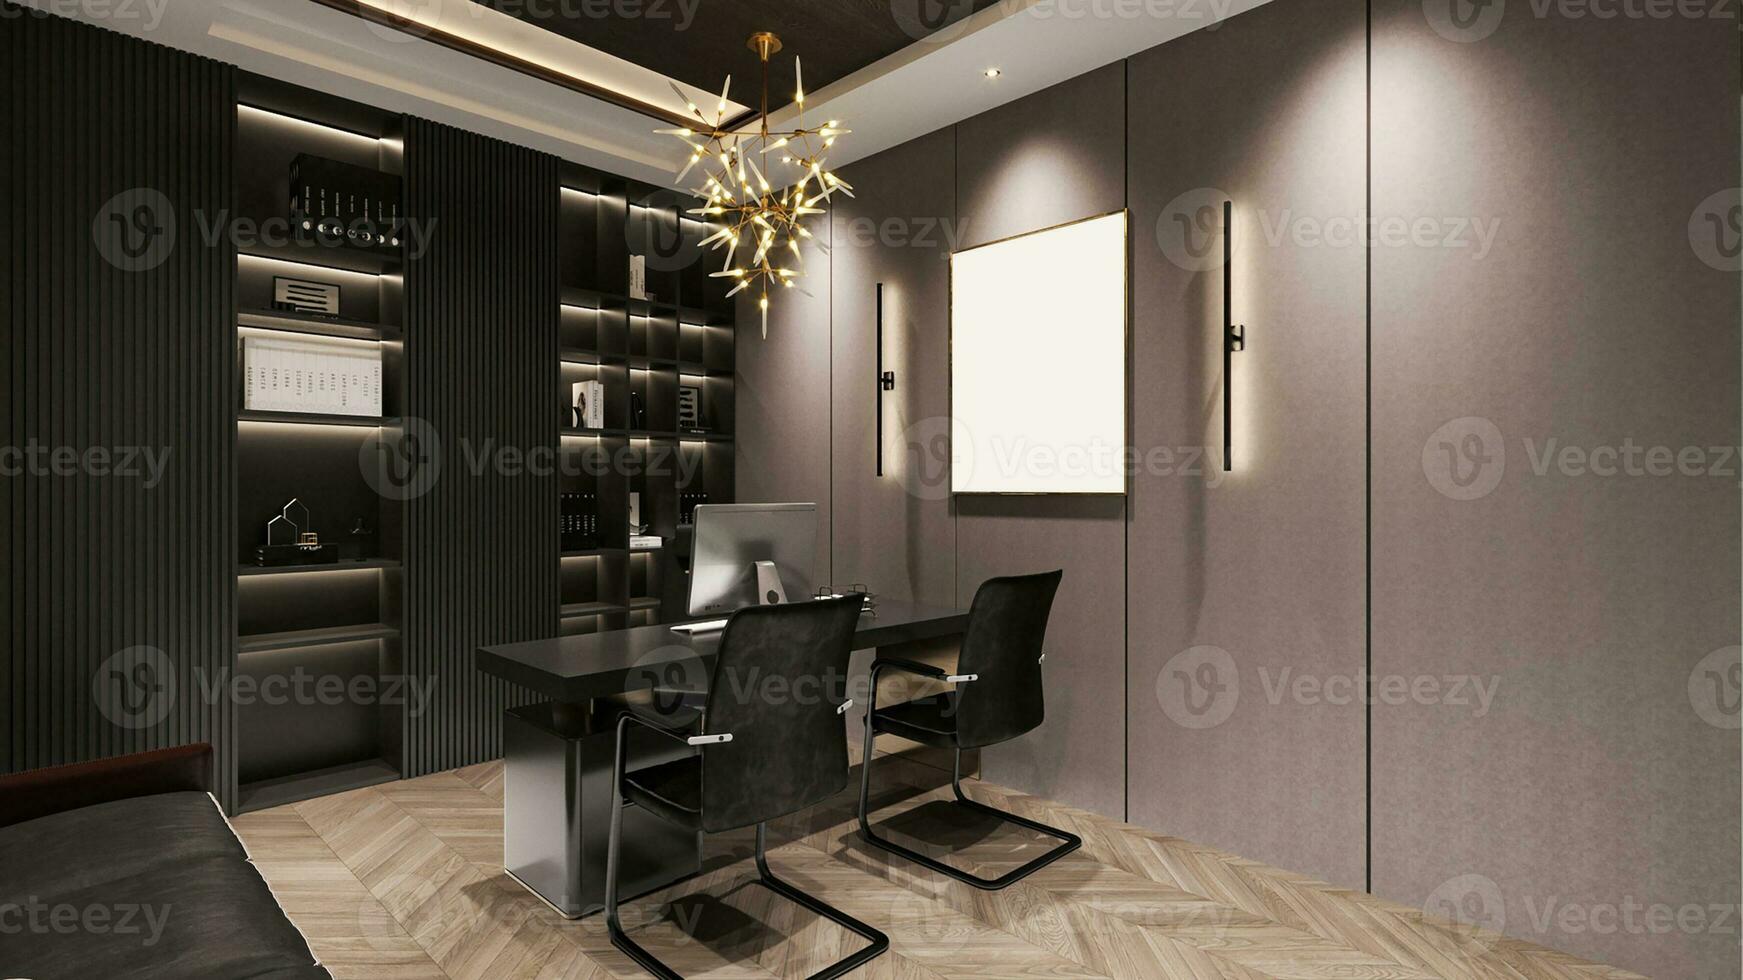 Transform Your Boring Office into a Productive and Inviting Space 3D rendering photo